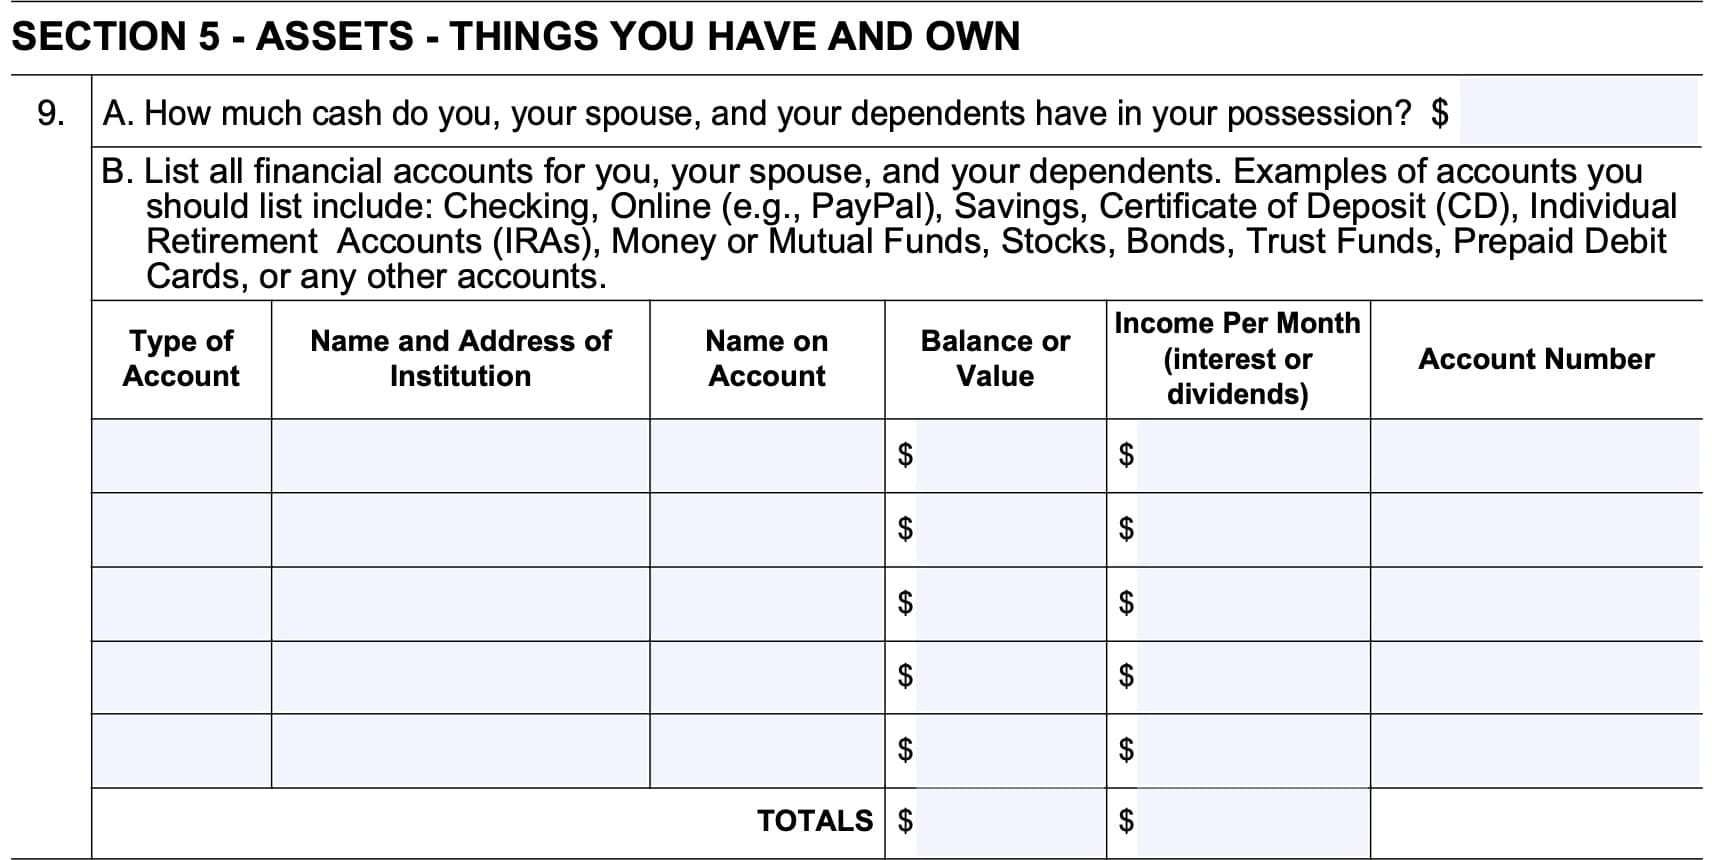 form ssa 632-bk, Section 5: Assets - things you have and own